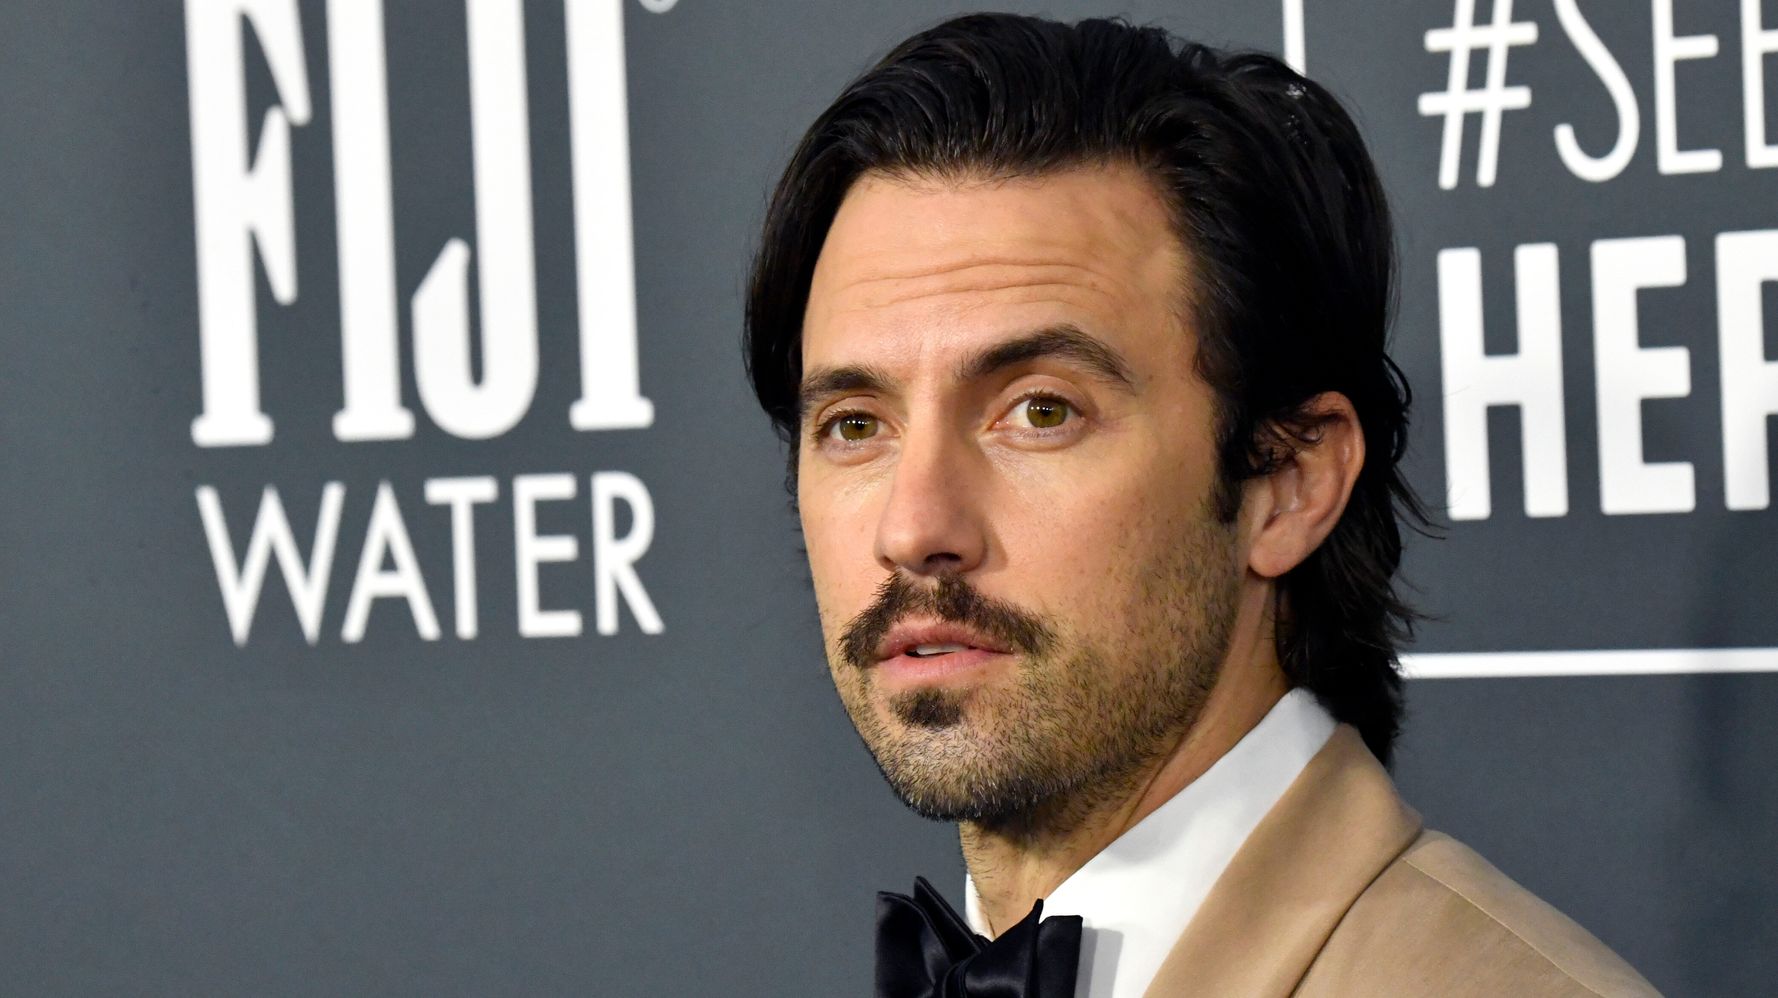 Milo Ventimiglia makes it clear which of Rory’s “Gilmore Girls” boyfriends he would choose